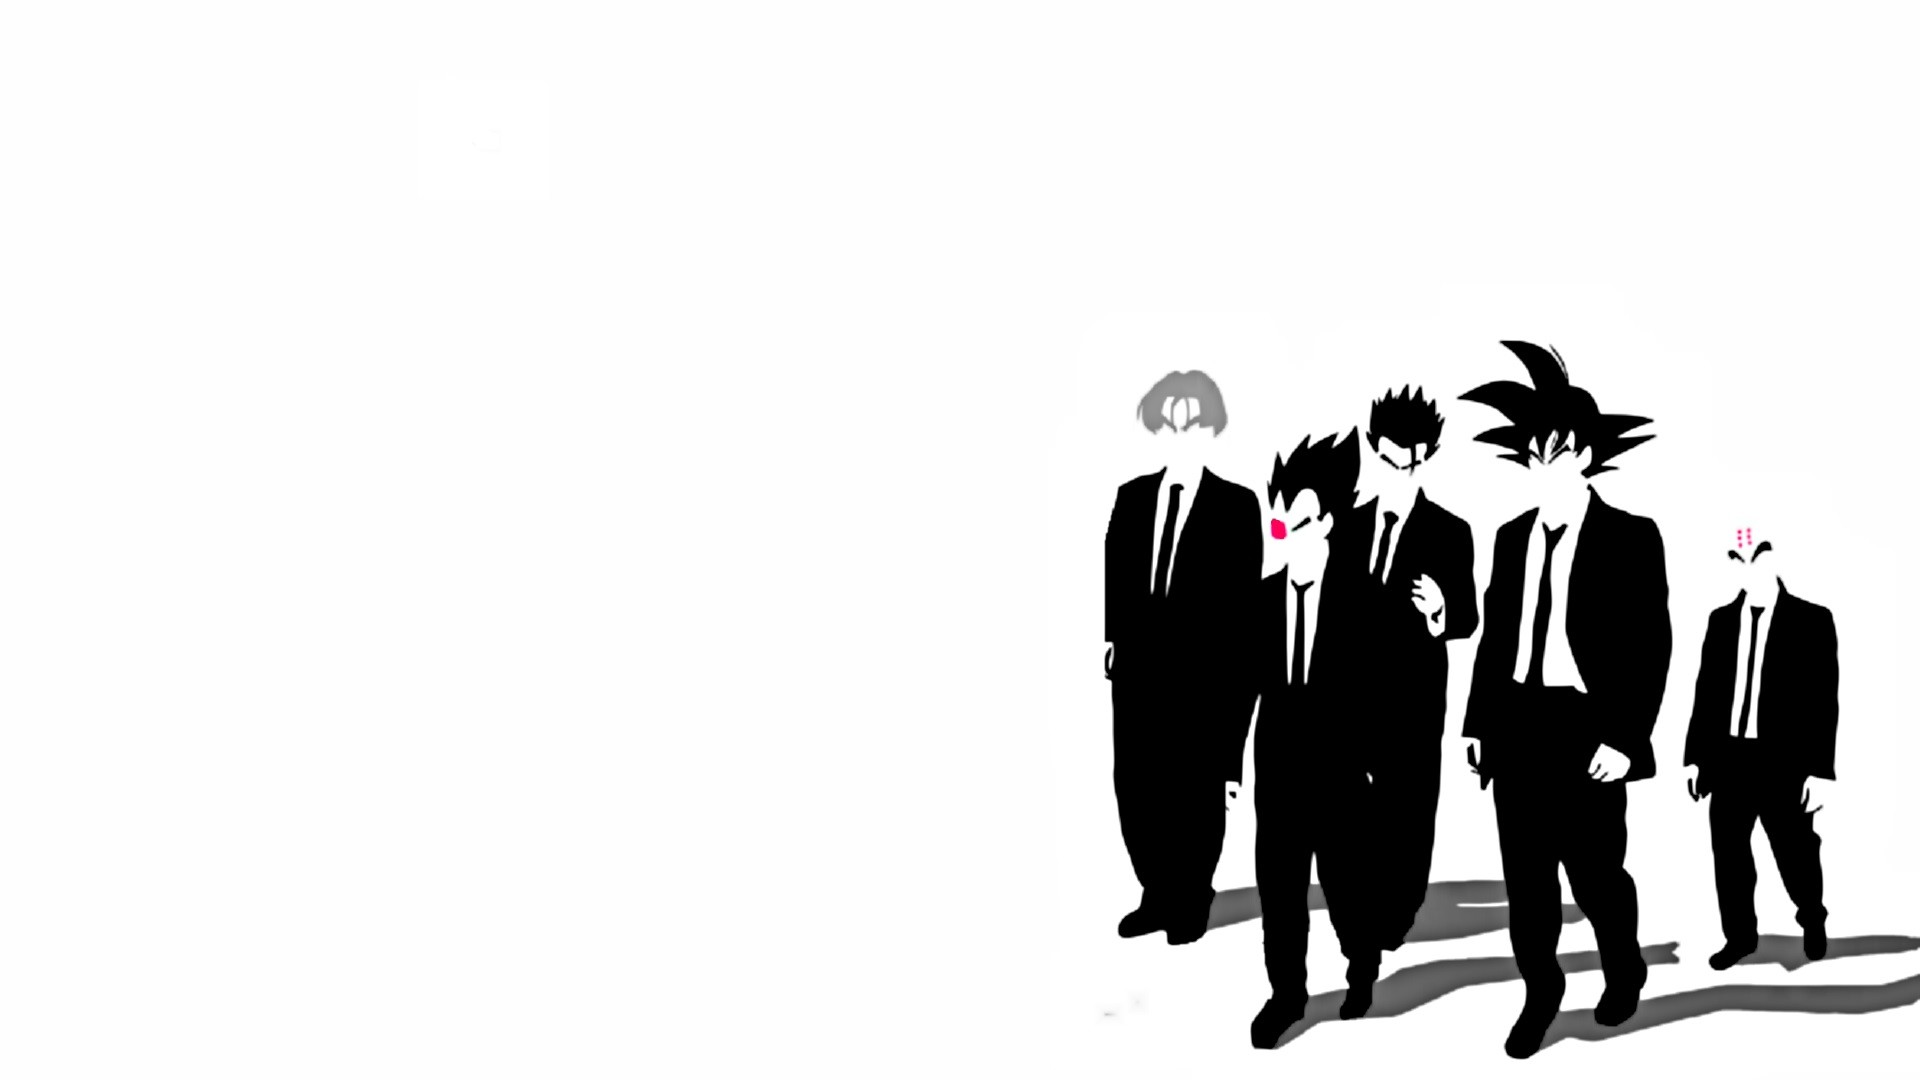 1920x1080 For those interested in a  Version of the DBZ Reservoir Dogs  wallpaper. (Piccolo cut out) ...